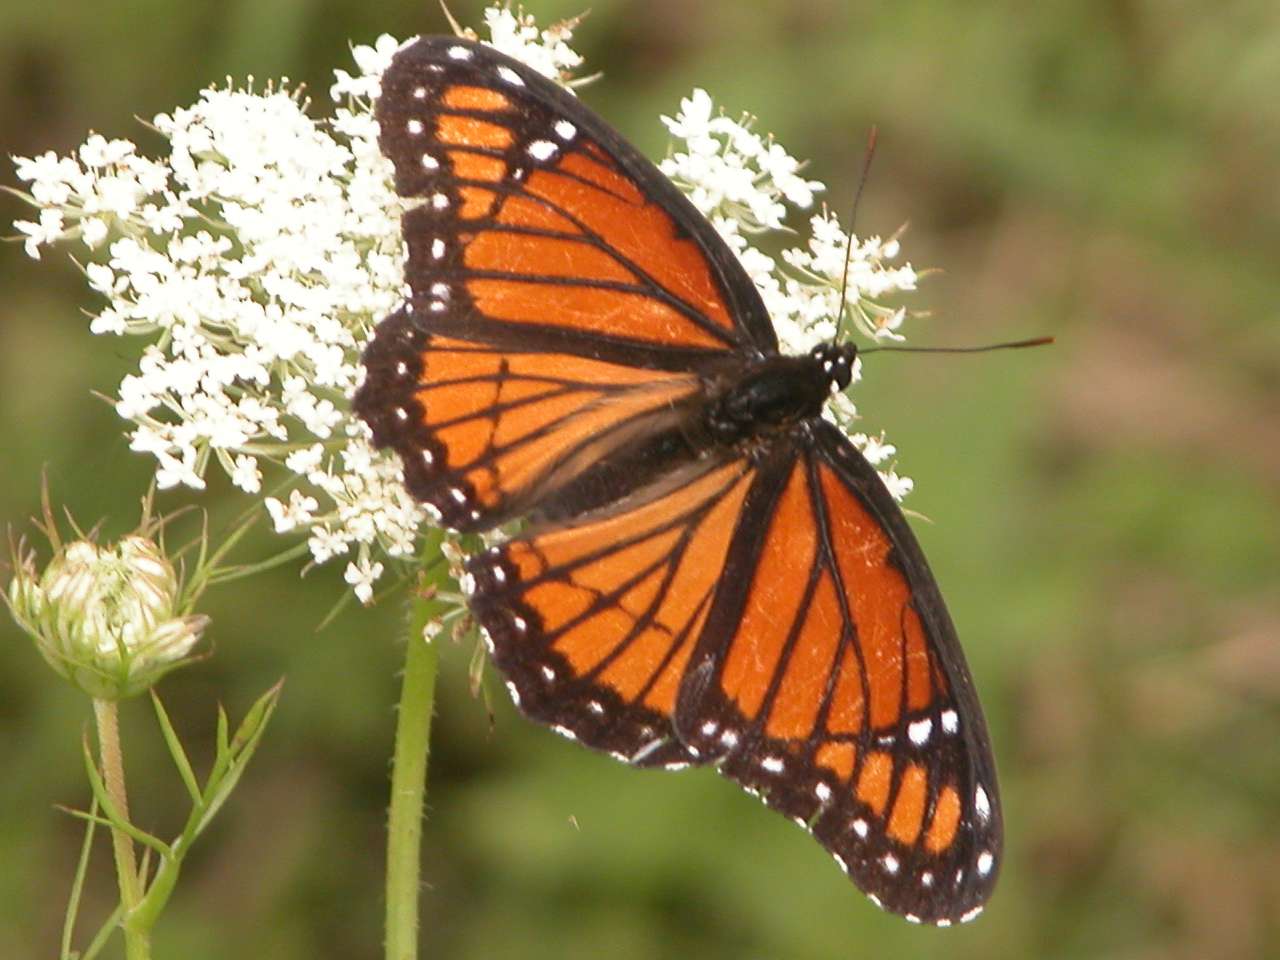 Viceroy butterfly on Queen Anne's lace